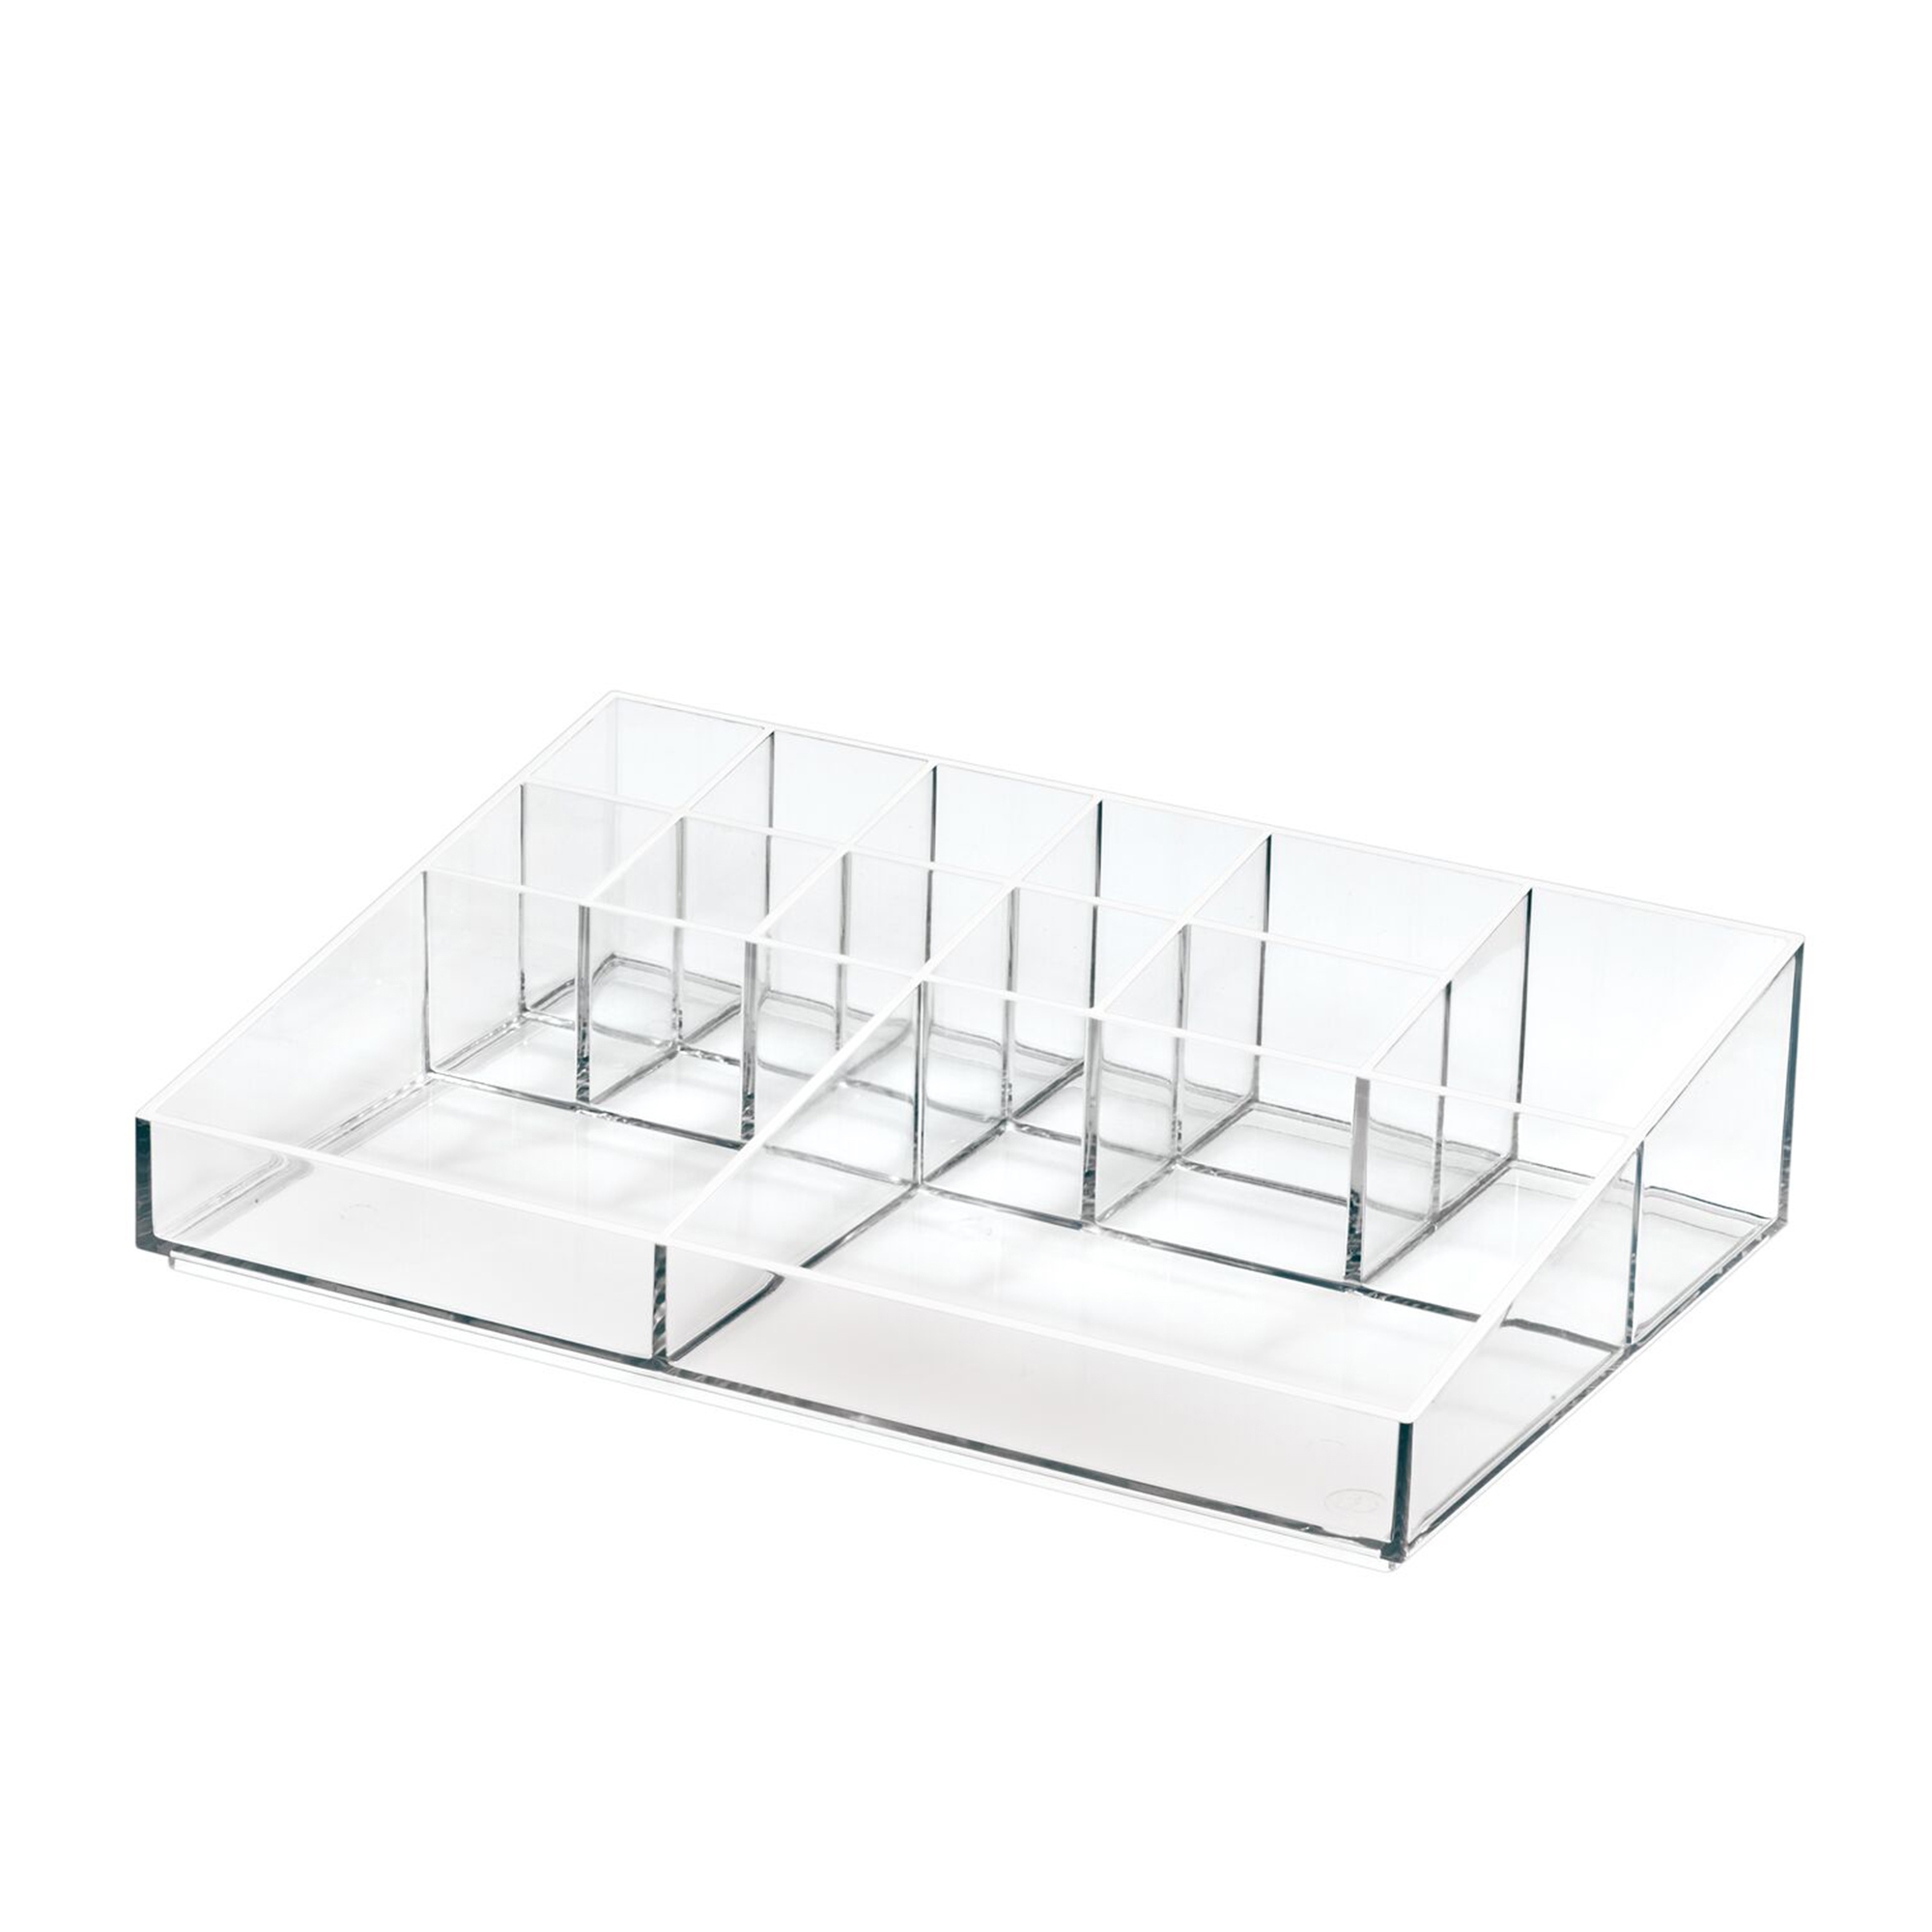 Sarah Tanno by iDesign Lip Station Organiser Clear Image 1